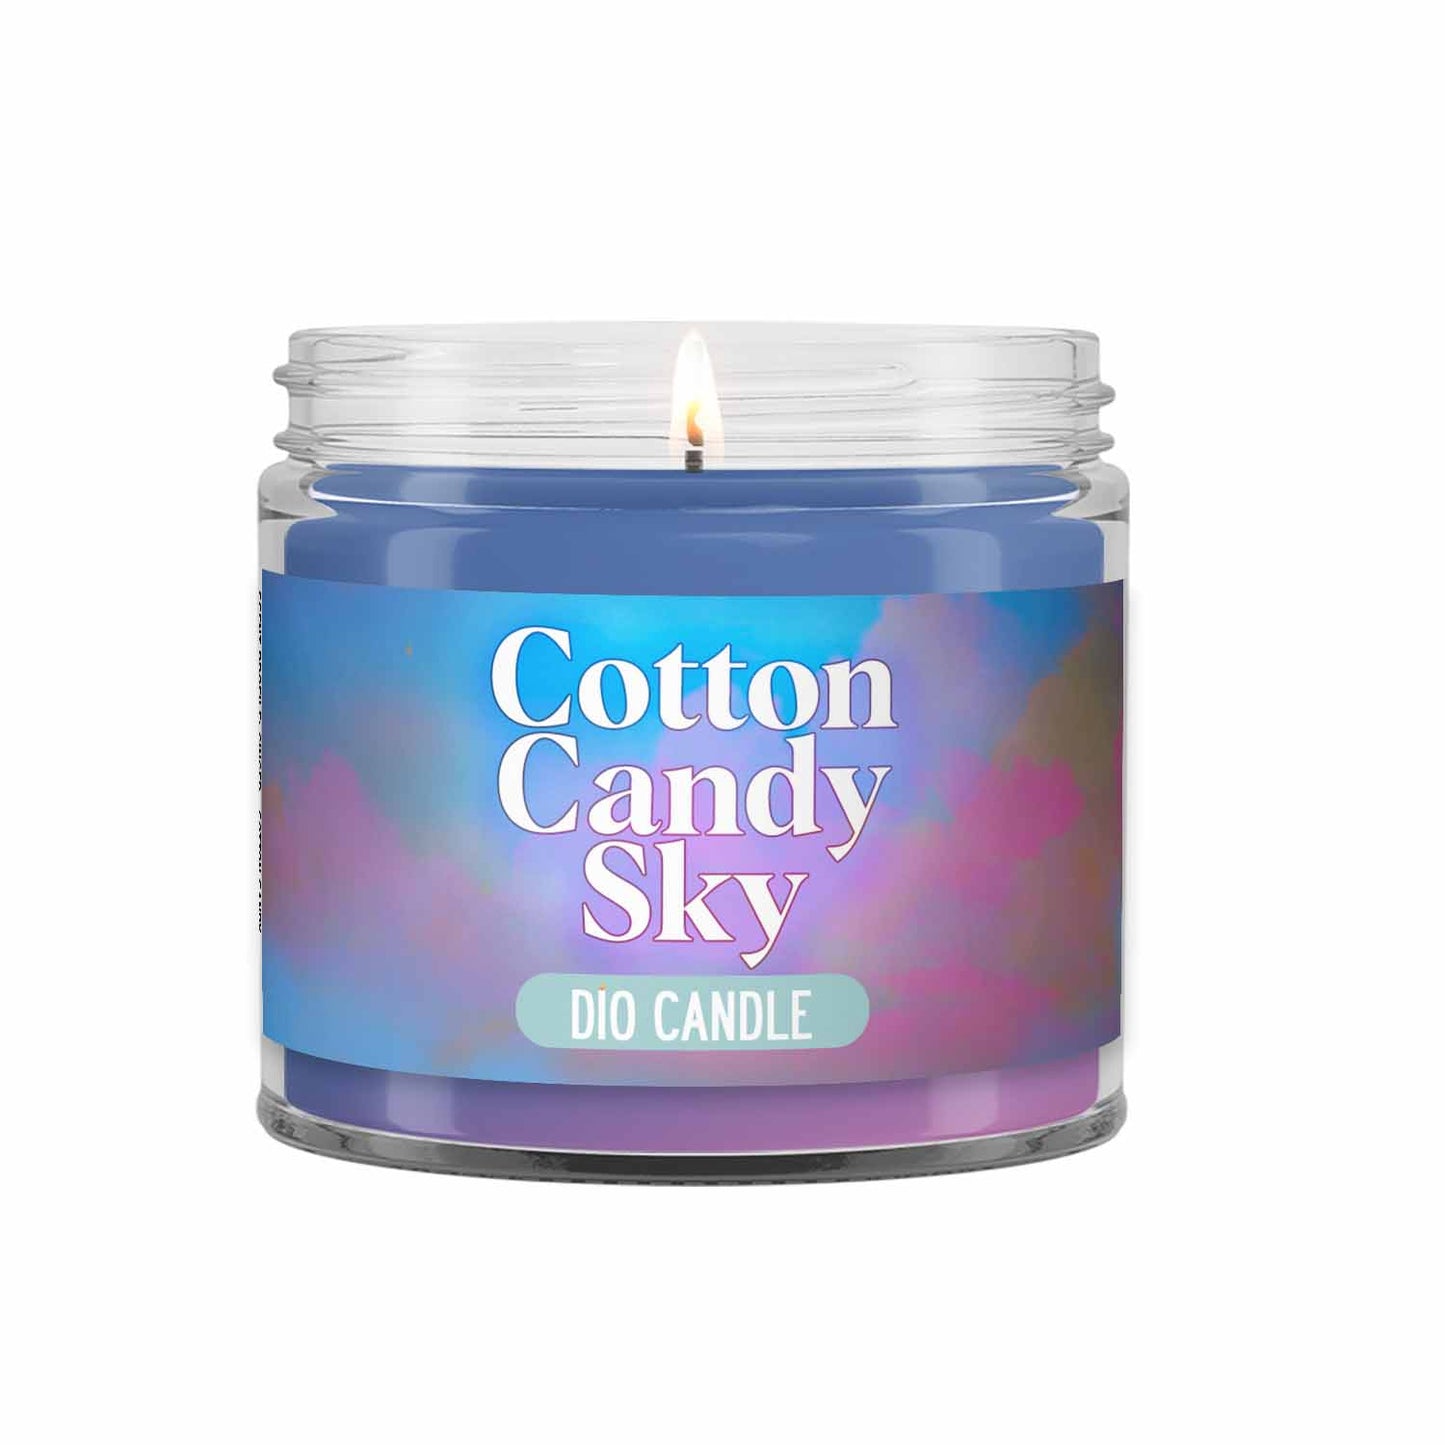 Cotton Candy Sky Candle - Ginger Cotton Candy Scented Soy – Dio